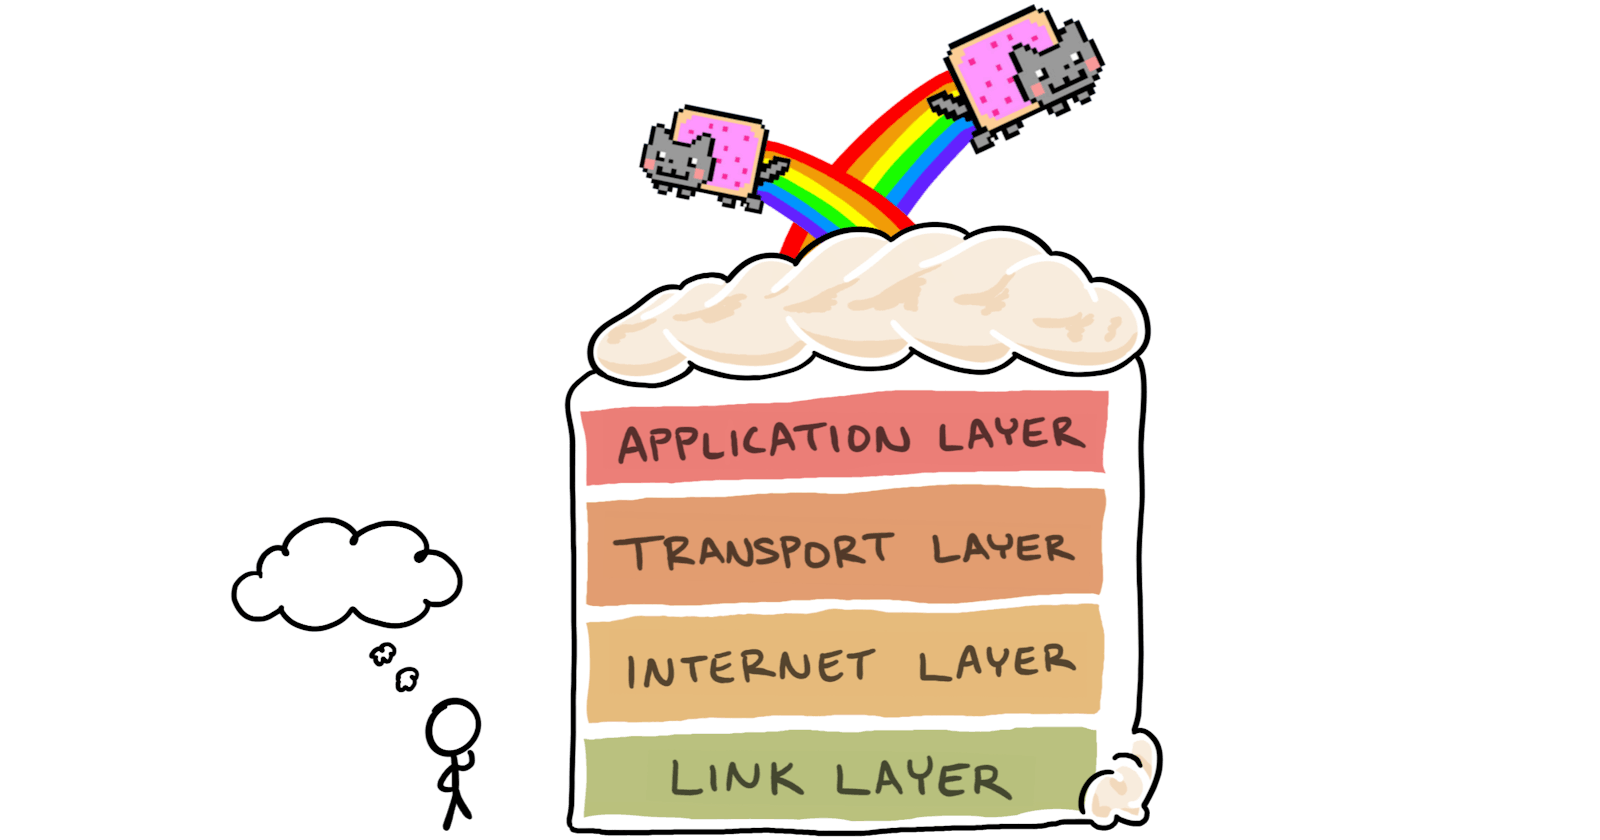 Let's Talk about OSI Model